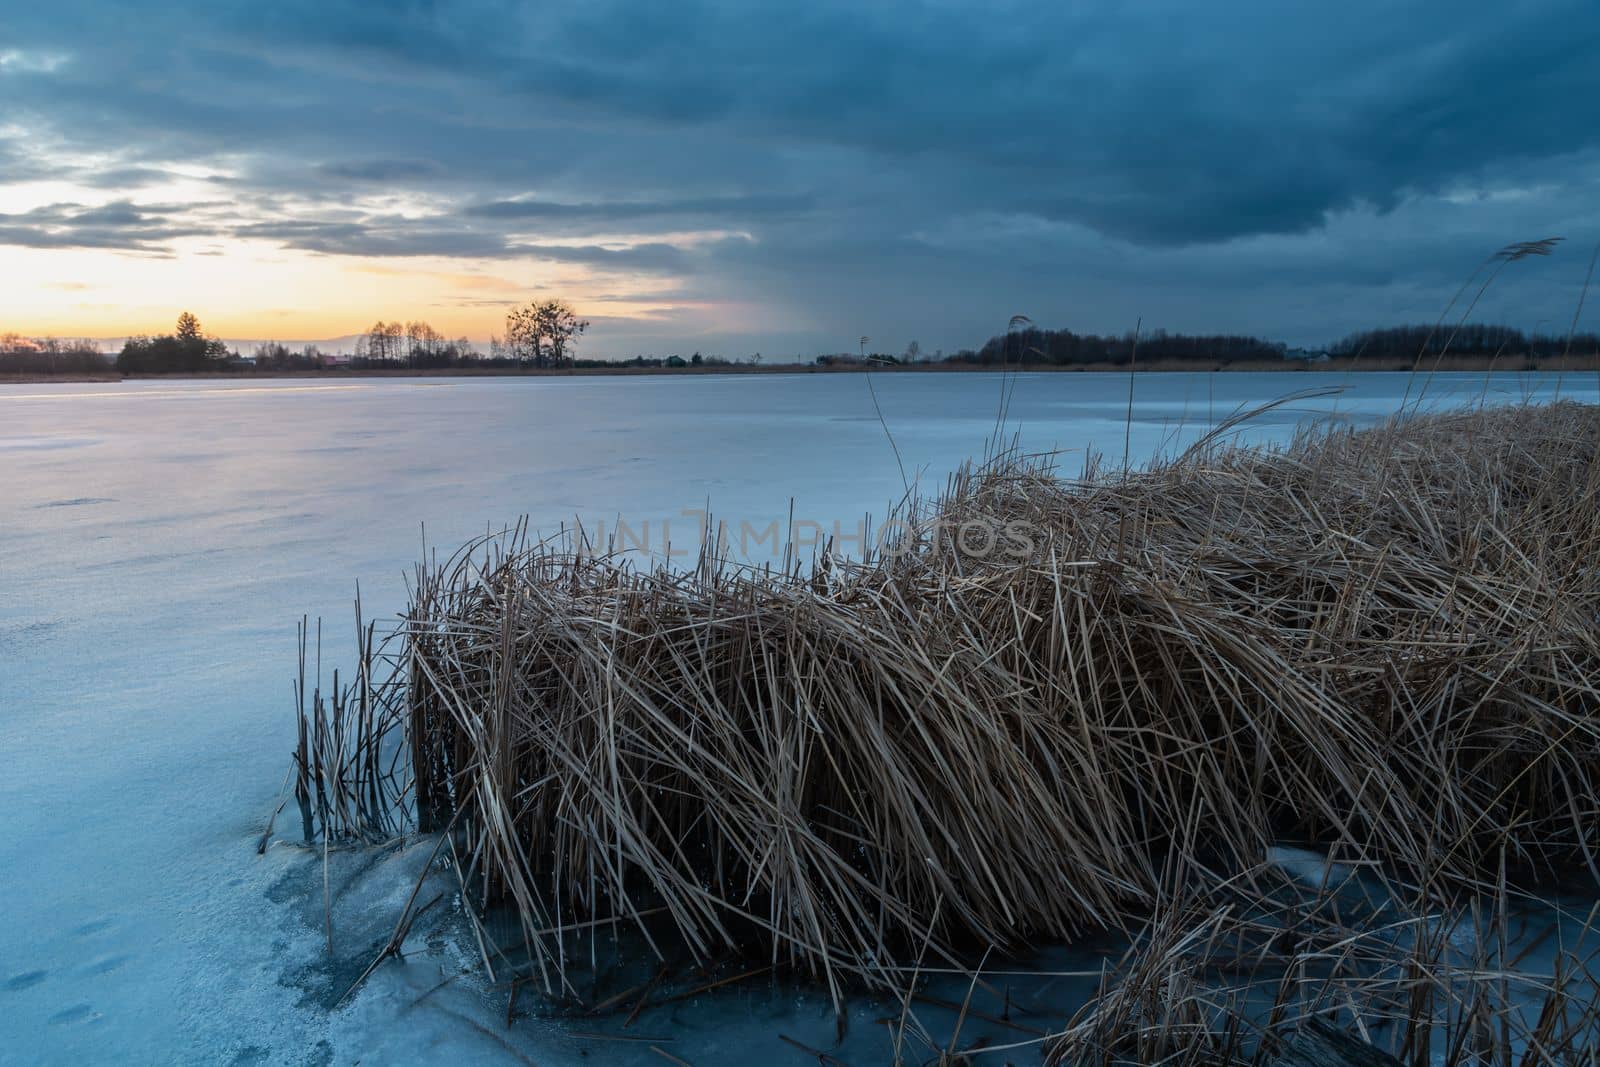 Dry grass in a frozen lake and overcast sky, winter evening view